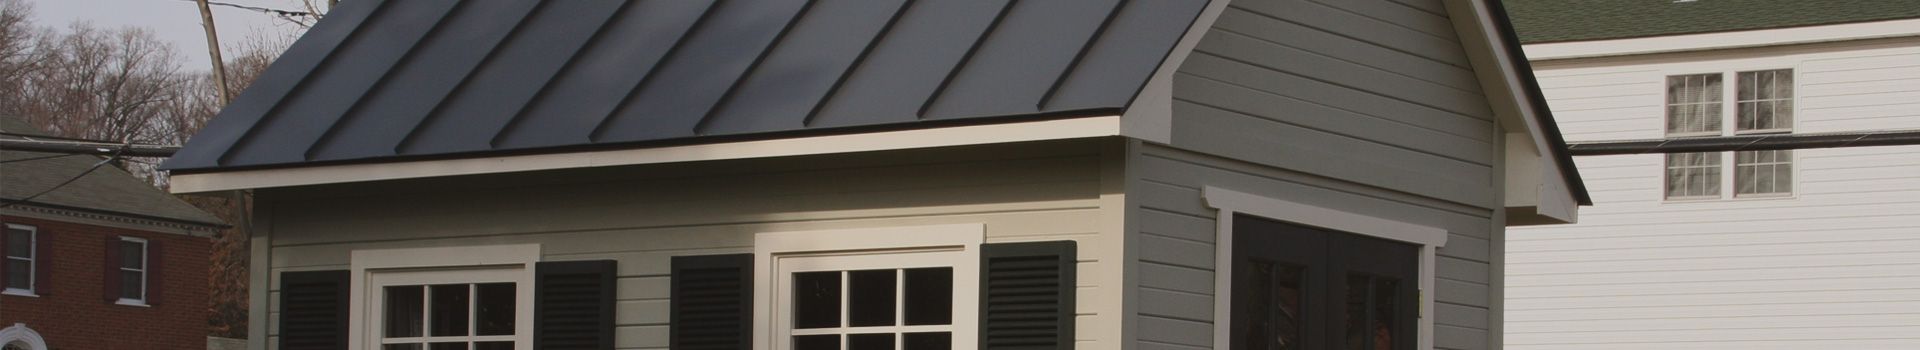 Roofing information beauty shot Summerwood products